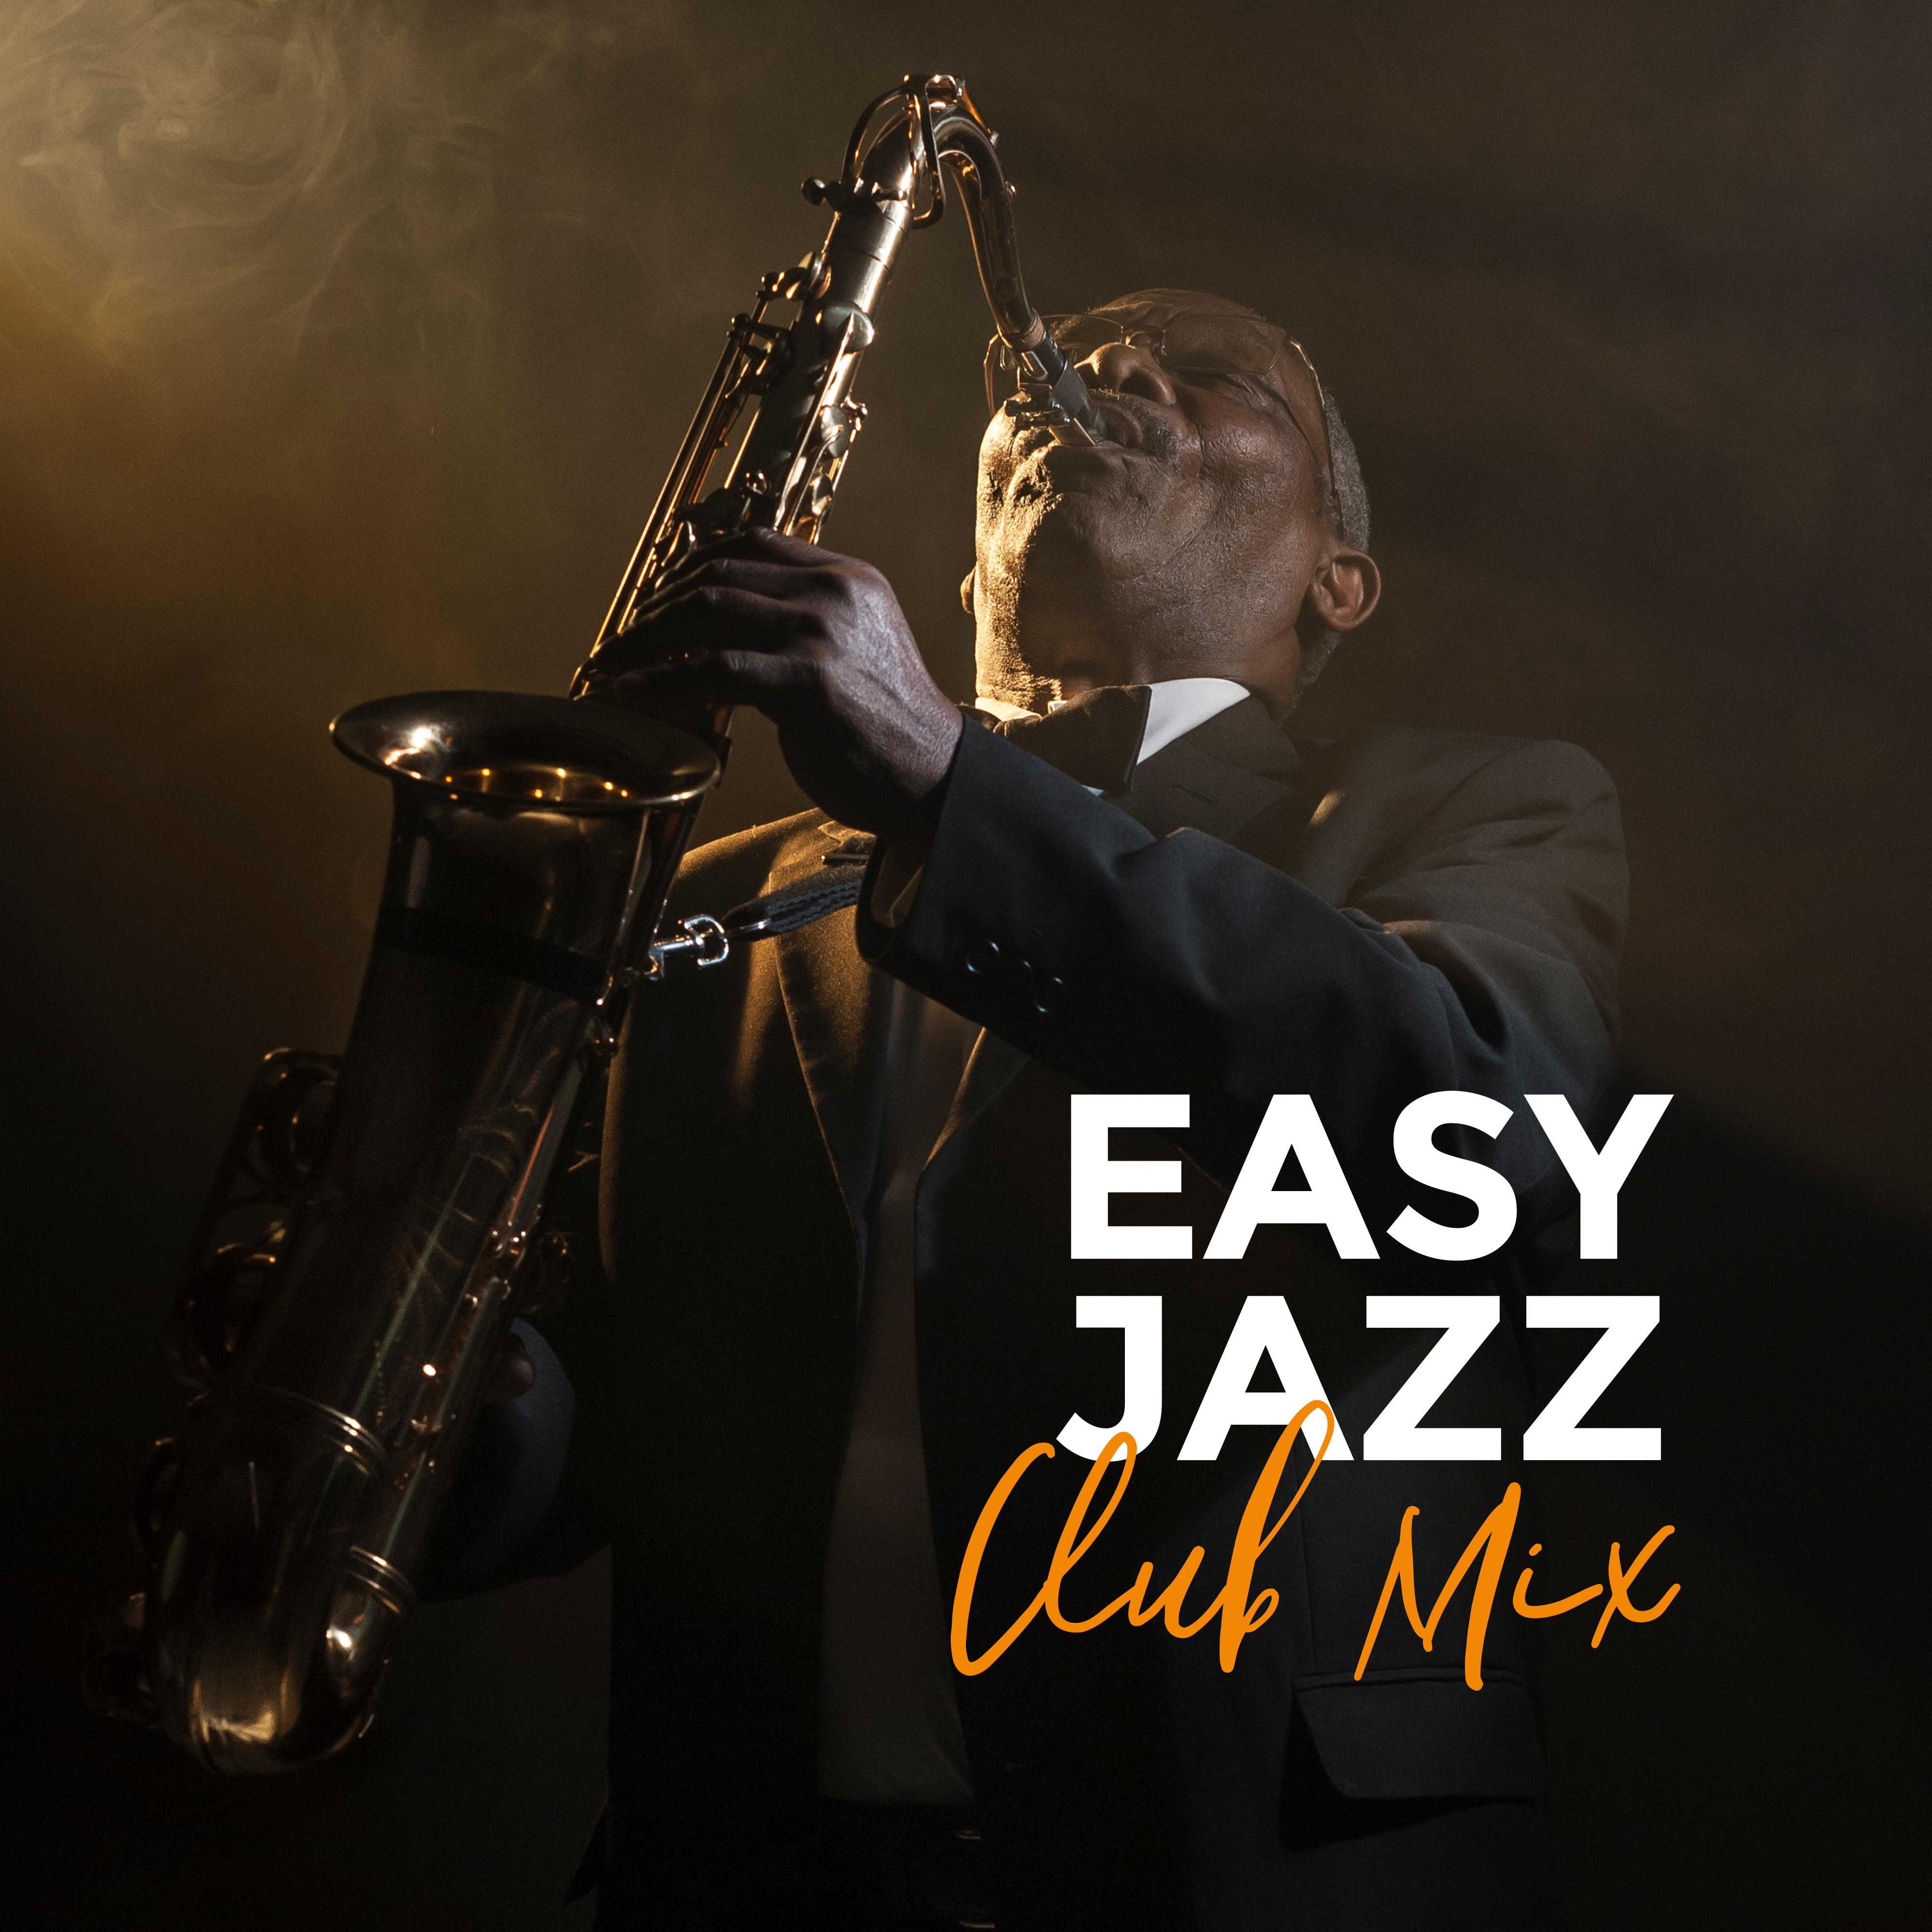 Easy Jazz Club Mix  Instrumental Smooth Jazz Music Selection for Dance Party, Happy Vintage Melodies, Sounds of Piano, Saxophone  More